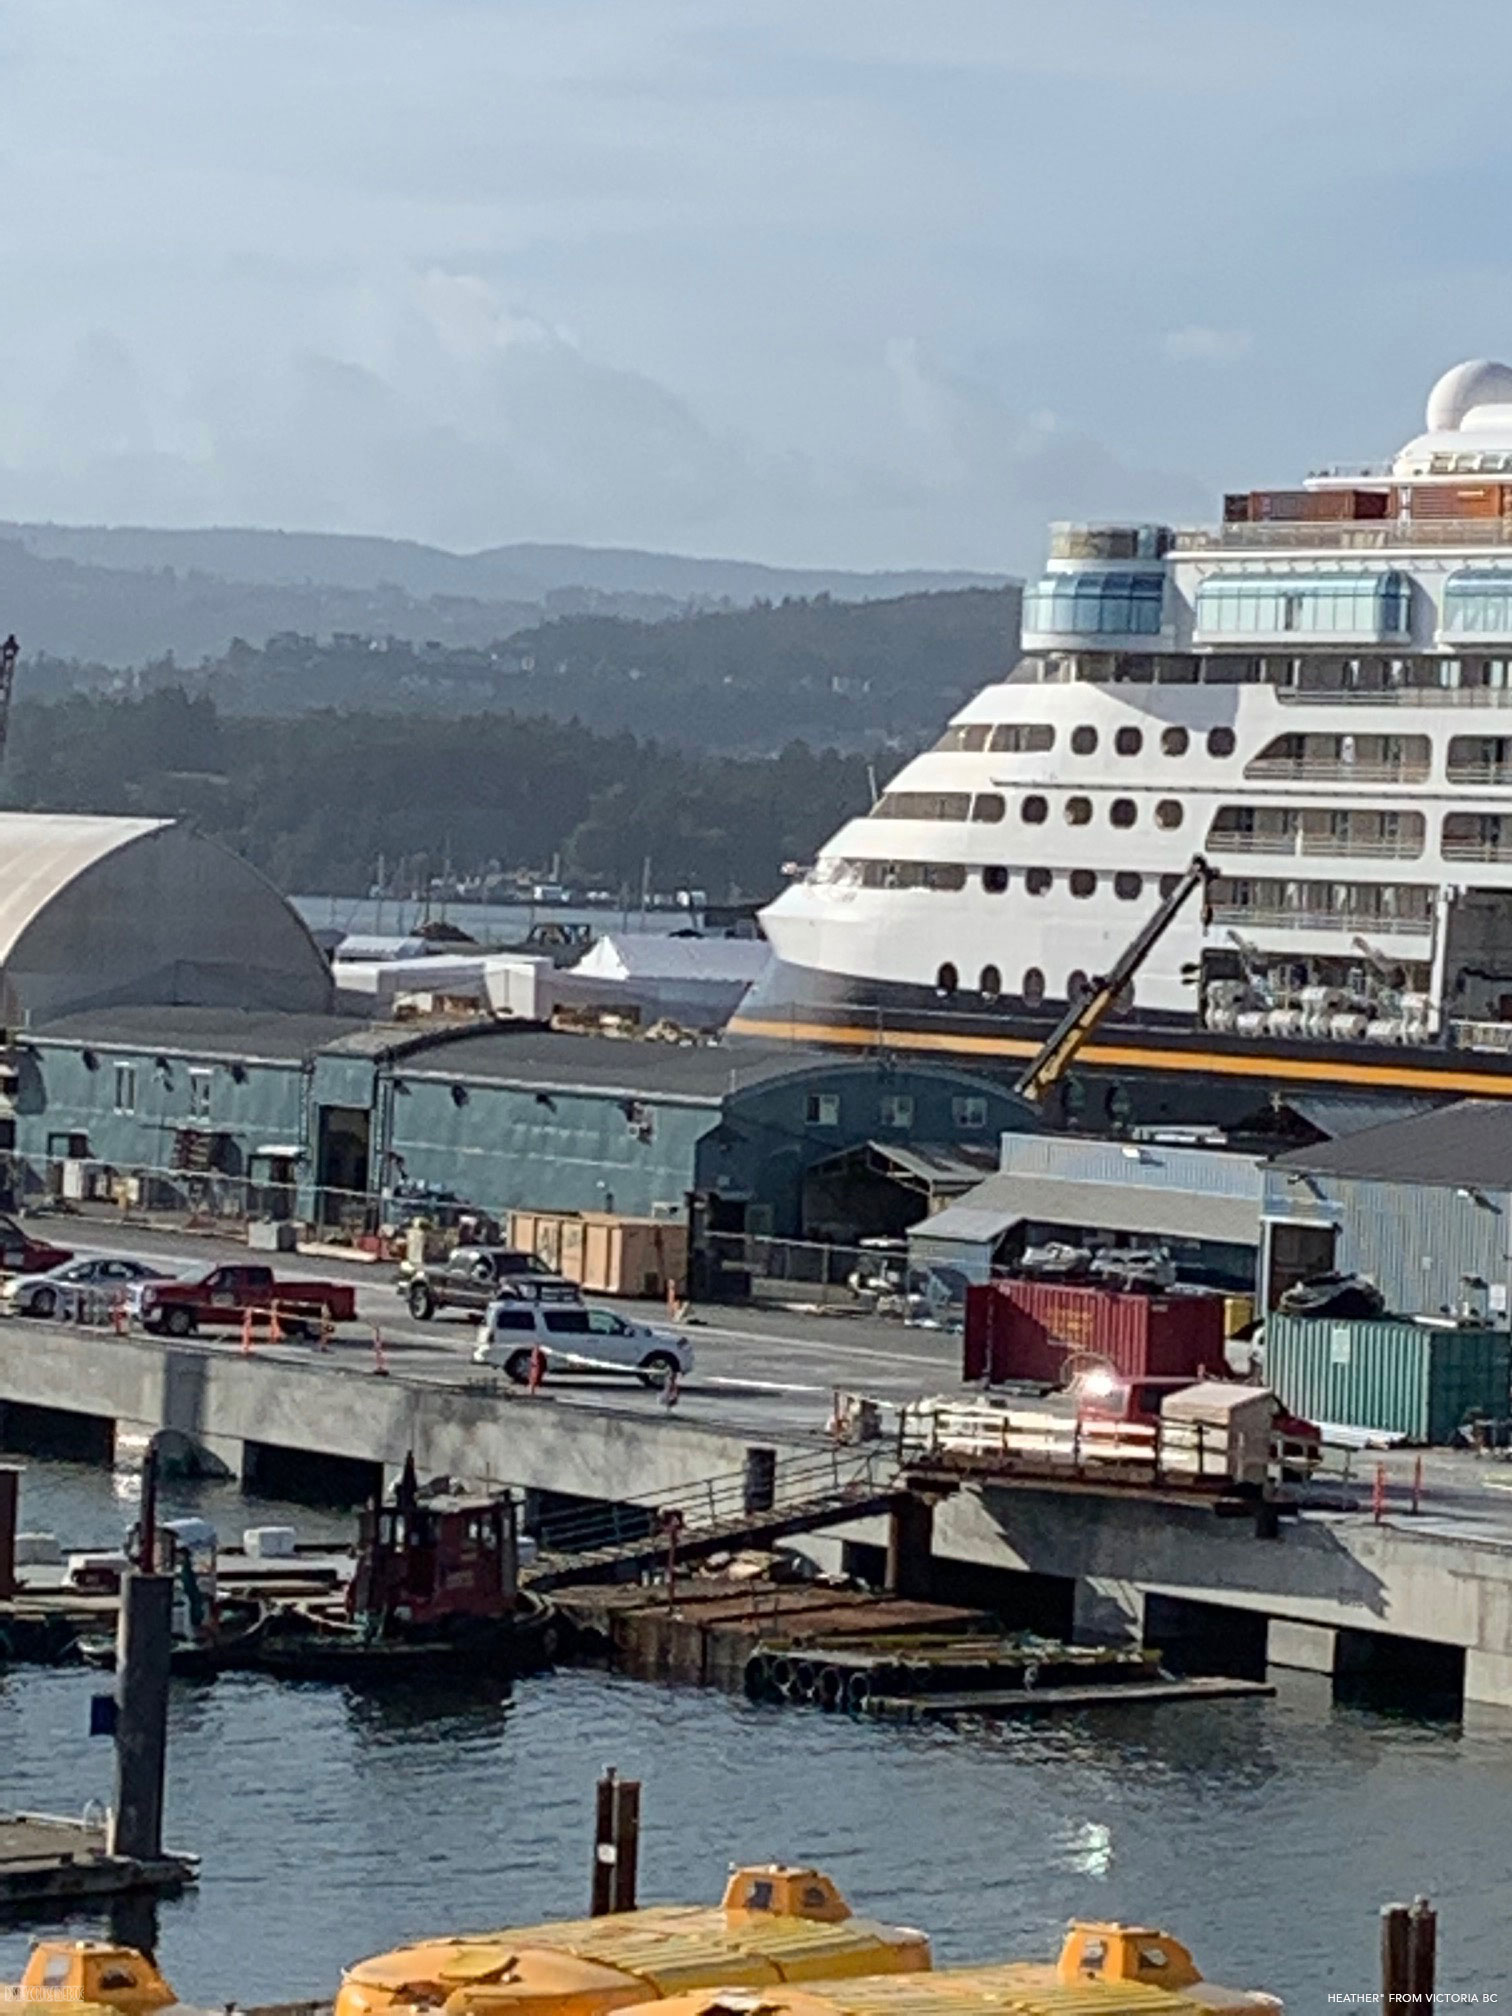 A Glimpse of the Disney Wonder in a Victoria Dry Dock • The Disney